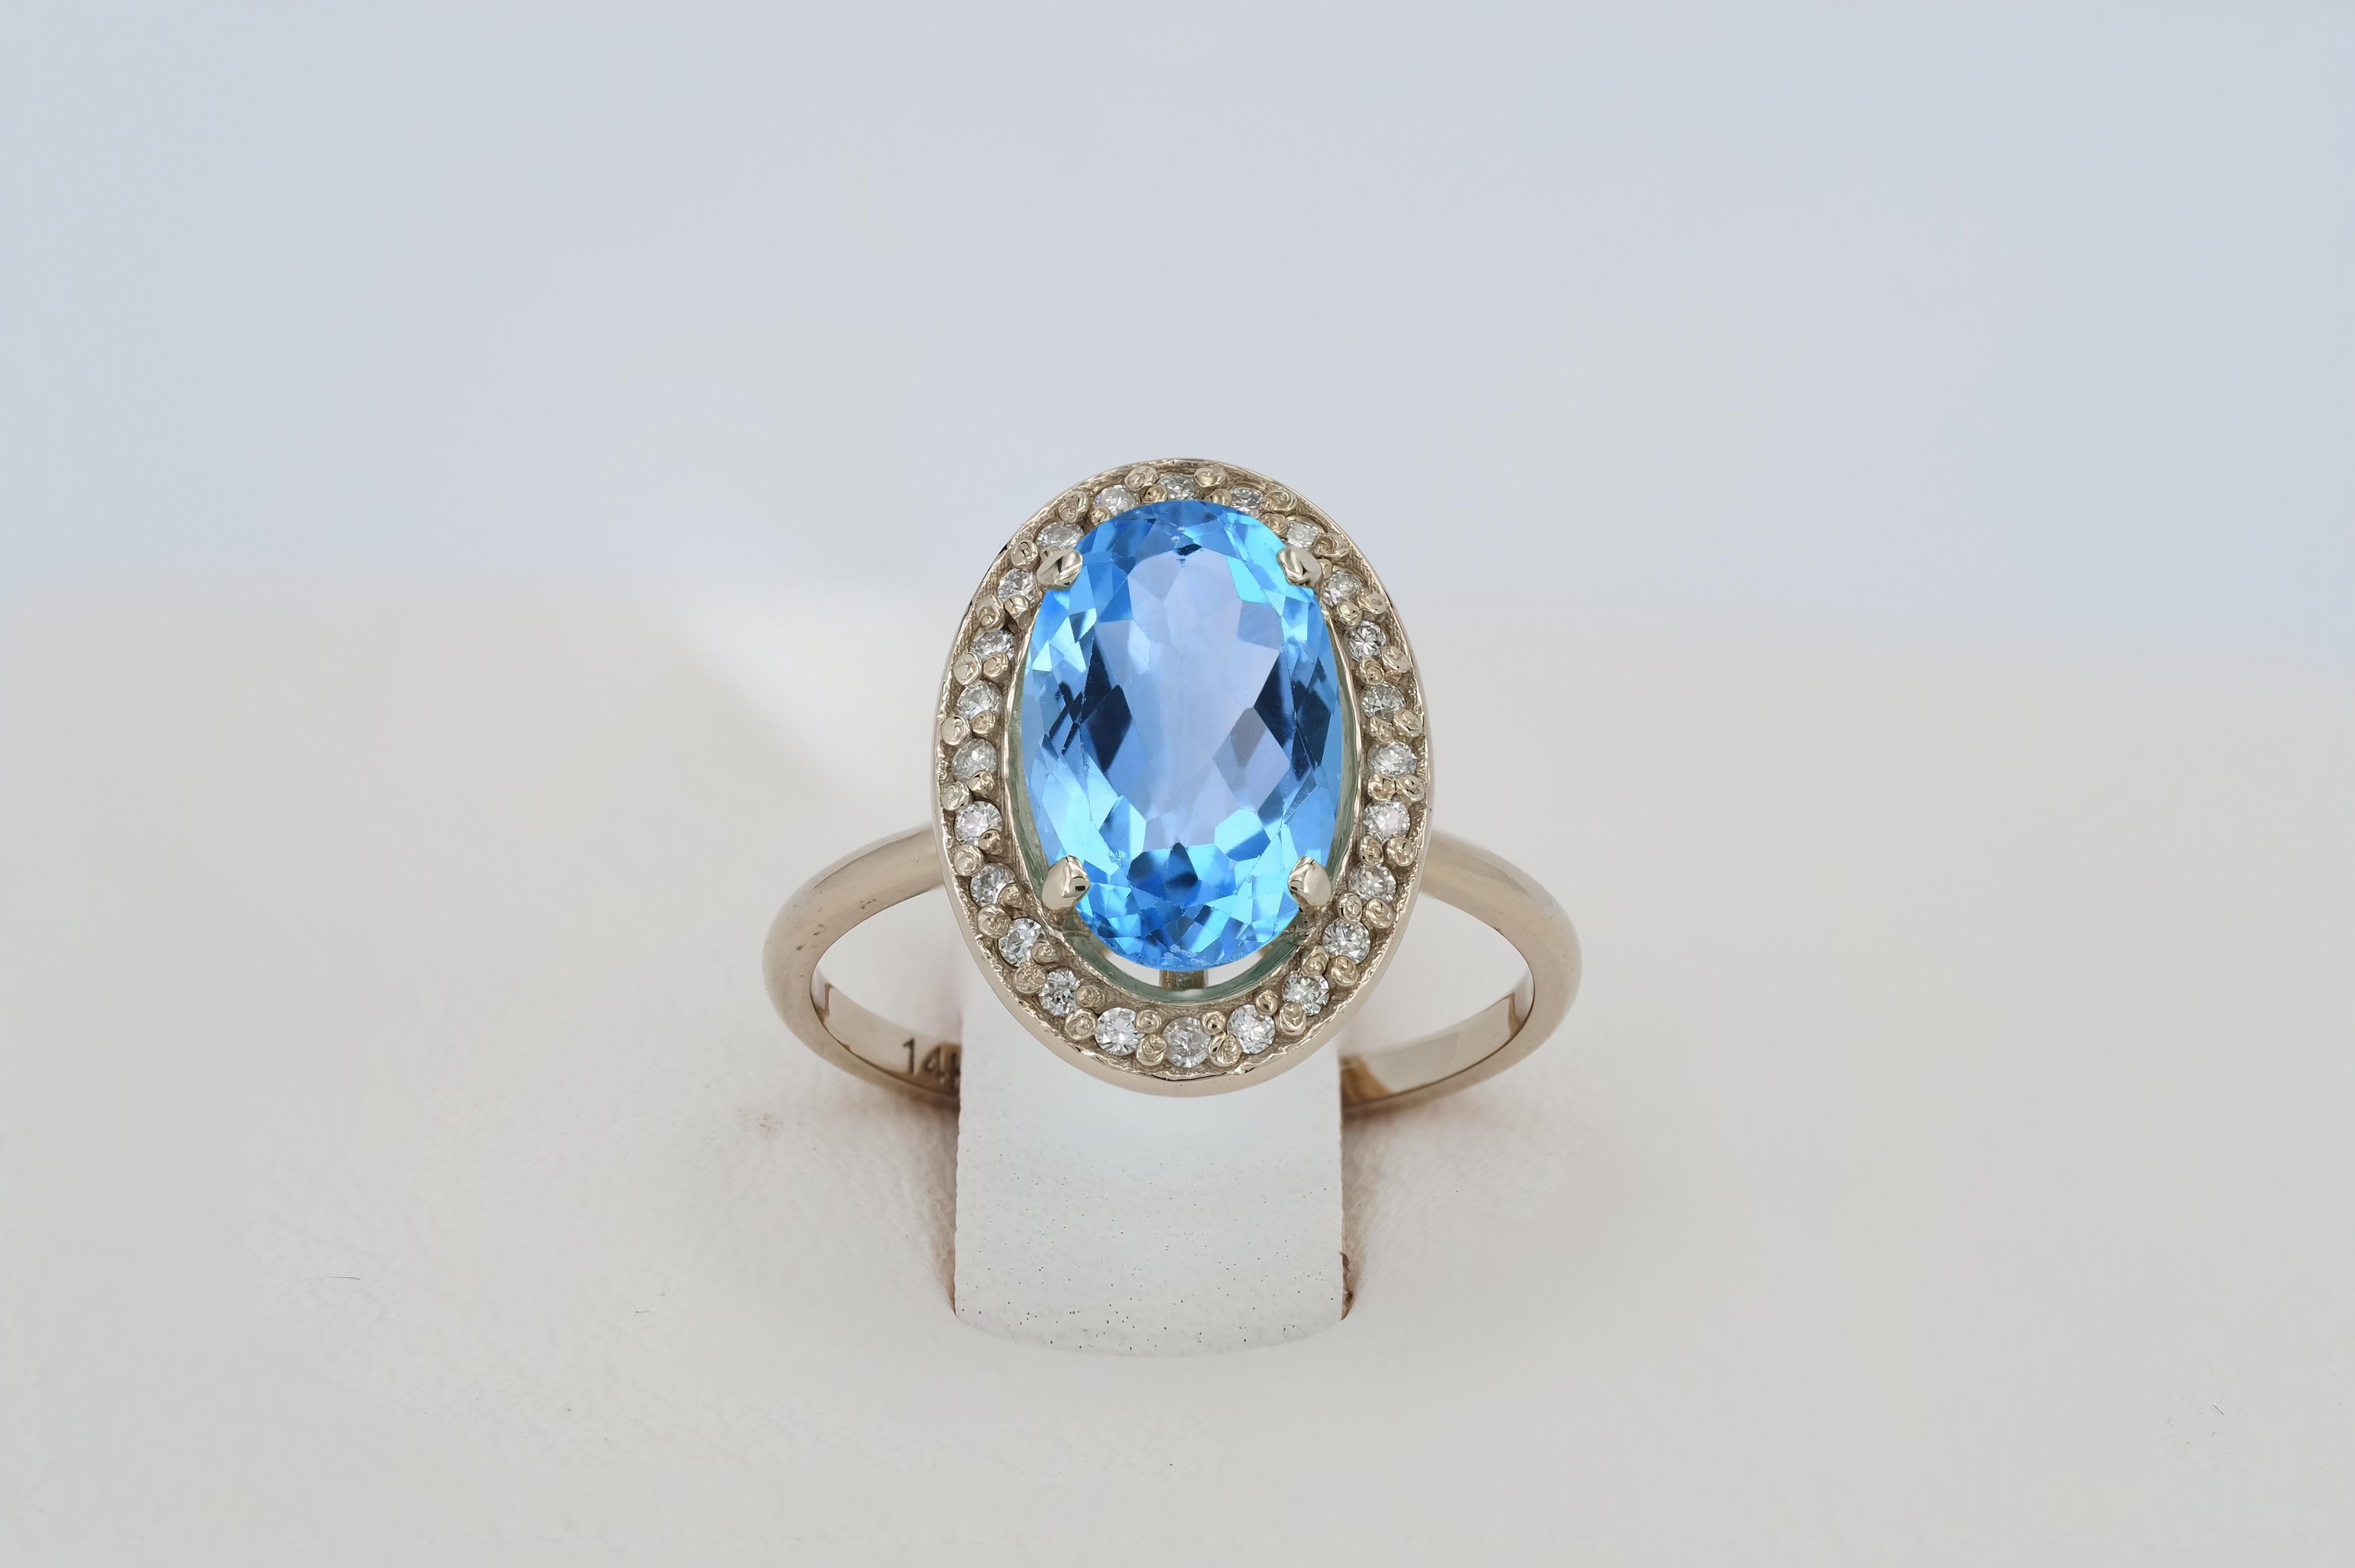 For Sale:  Topaz and diamonds 14k gold ring. 6